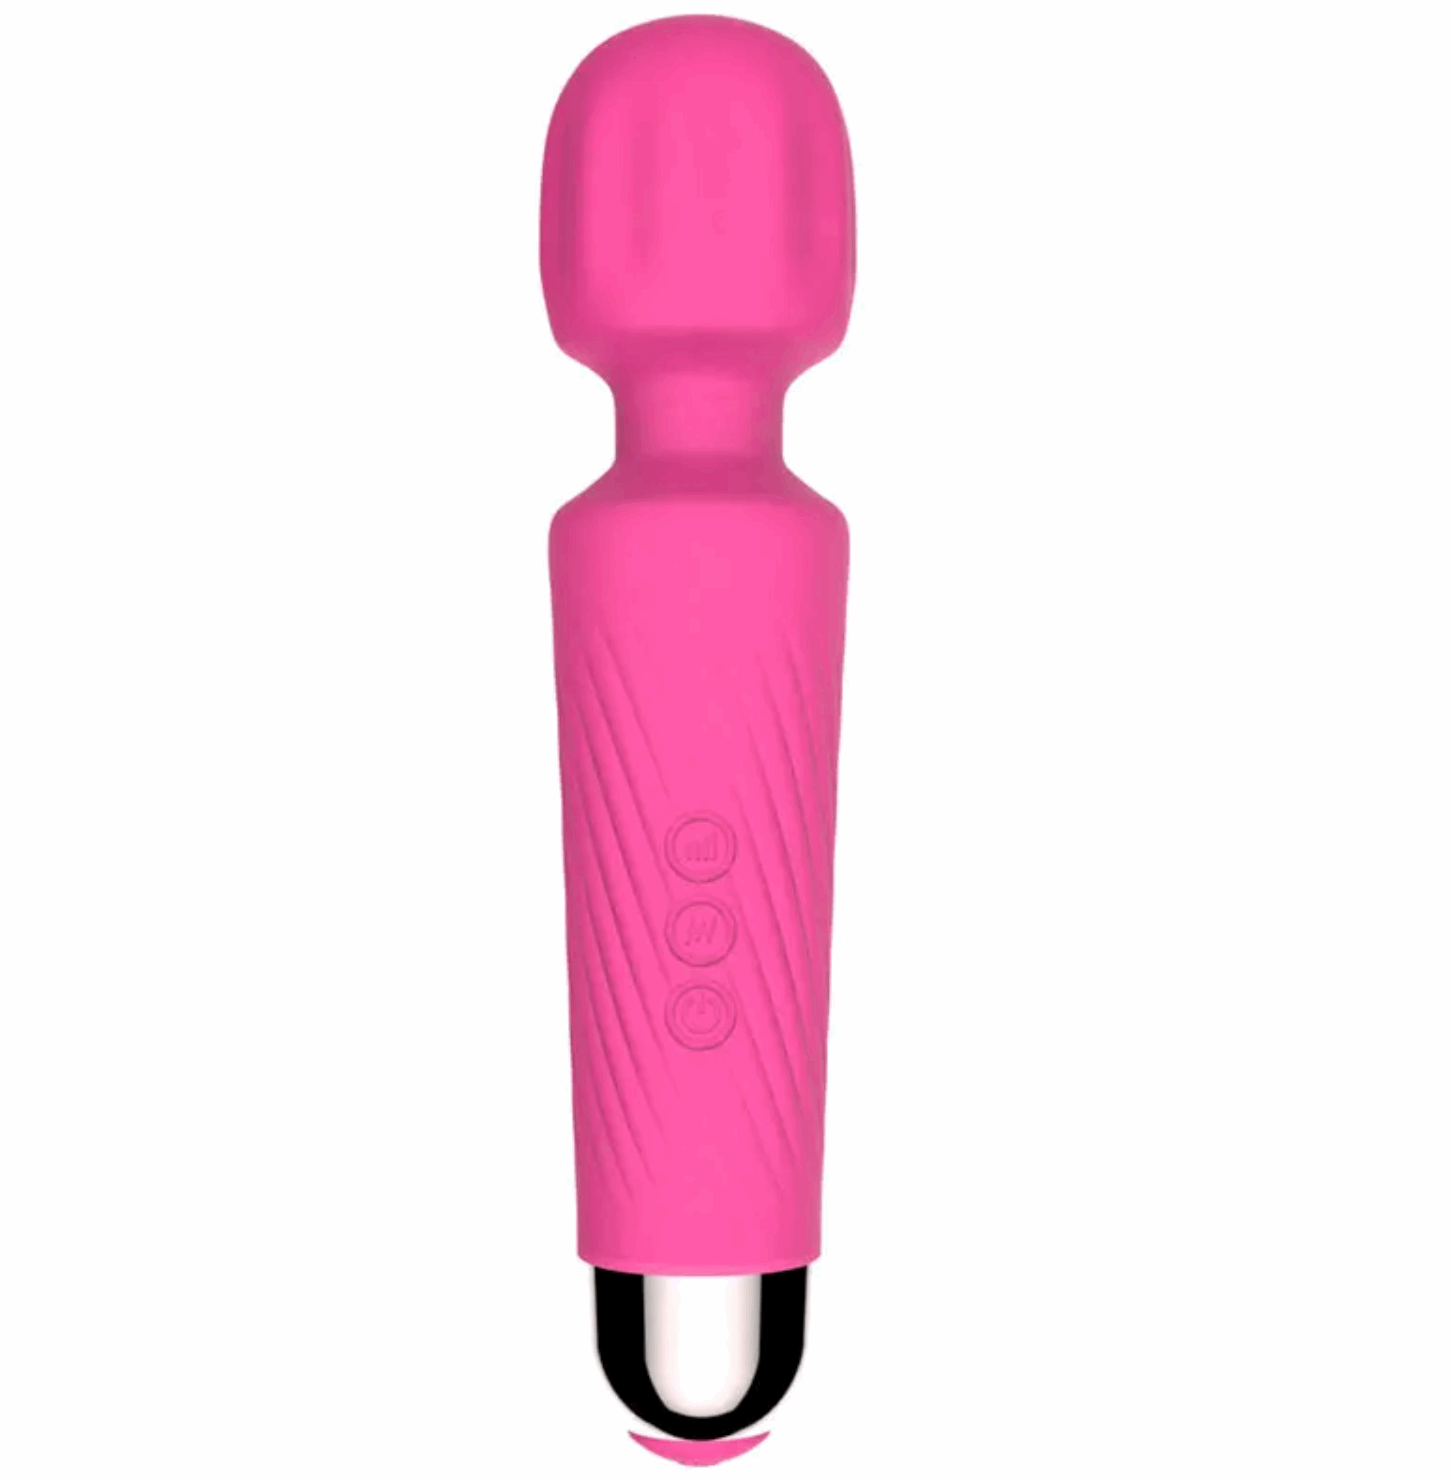 SpiriTouch Portable Handheld Personal Massager for Women Stress Relief with Vibration Waterproof - SpiriTouchMassager-U.S.